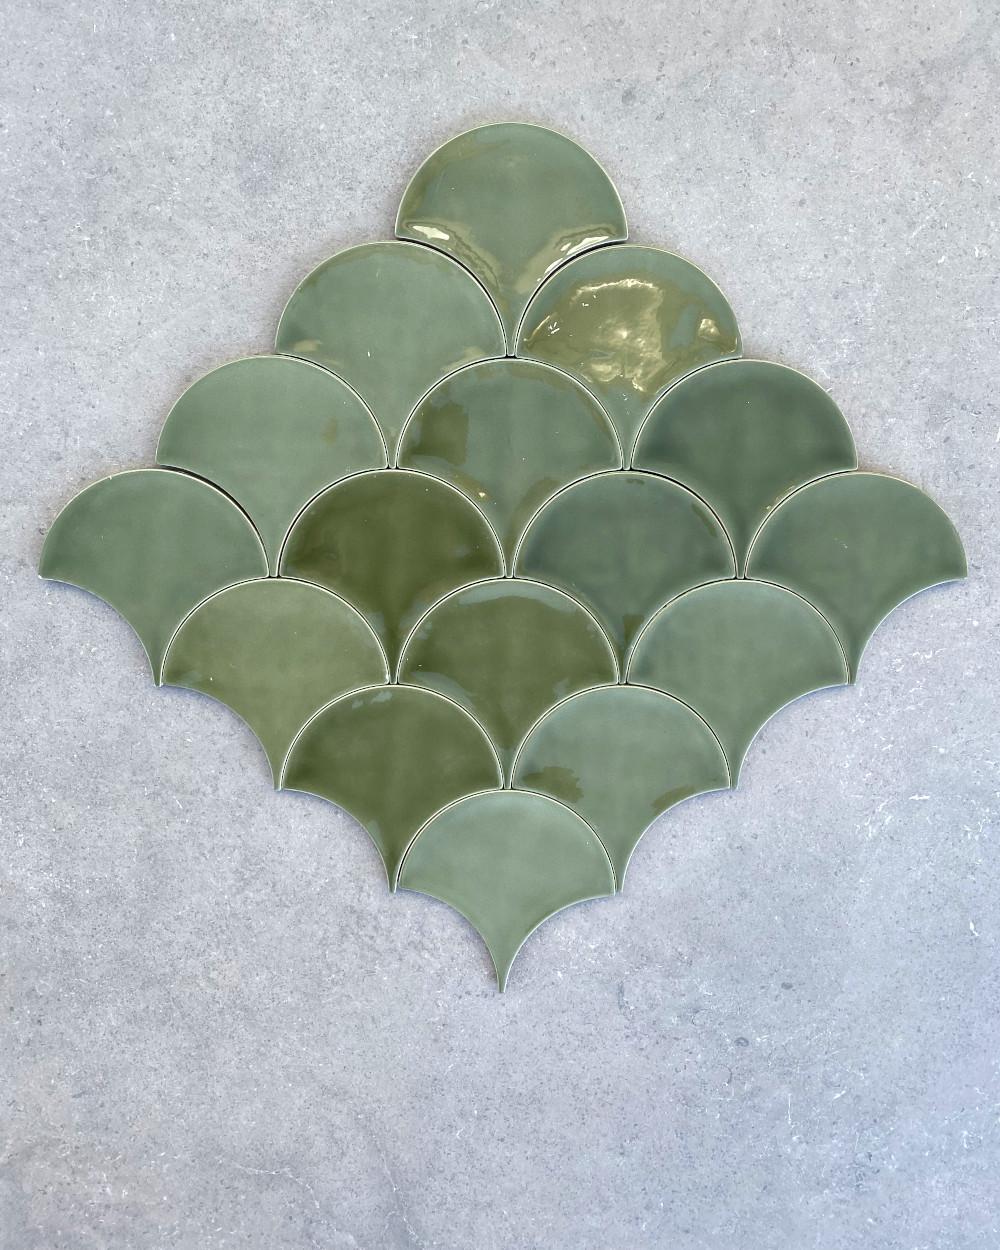 Green Fish Scale Tiles 12x12.5 cm | SAMPLE SHIPPING